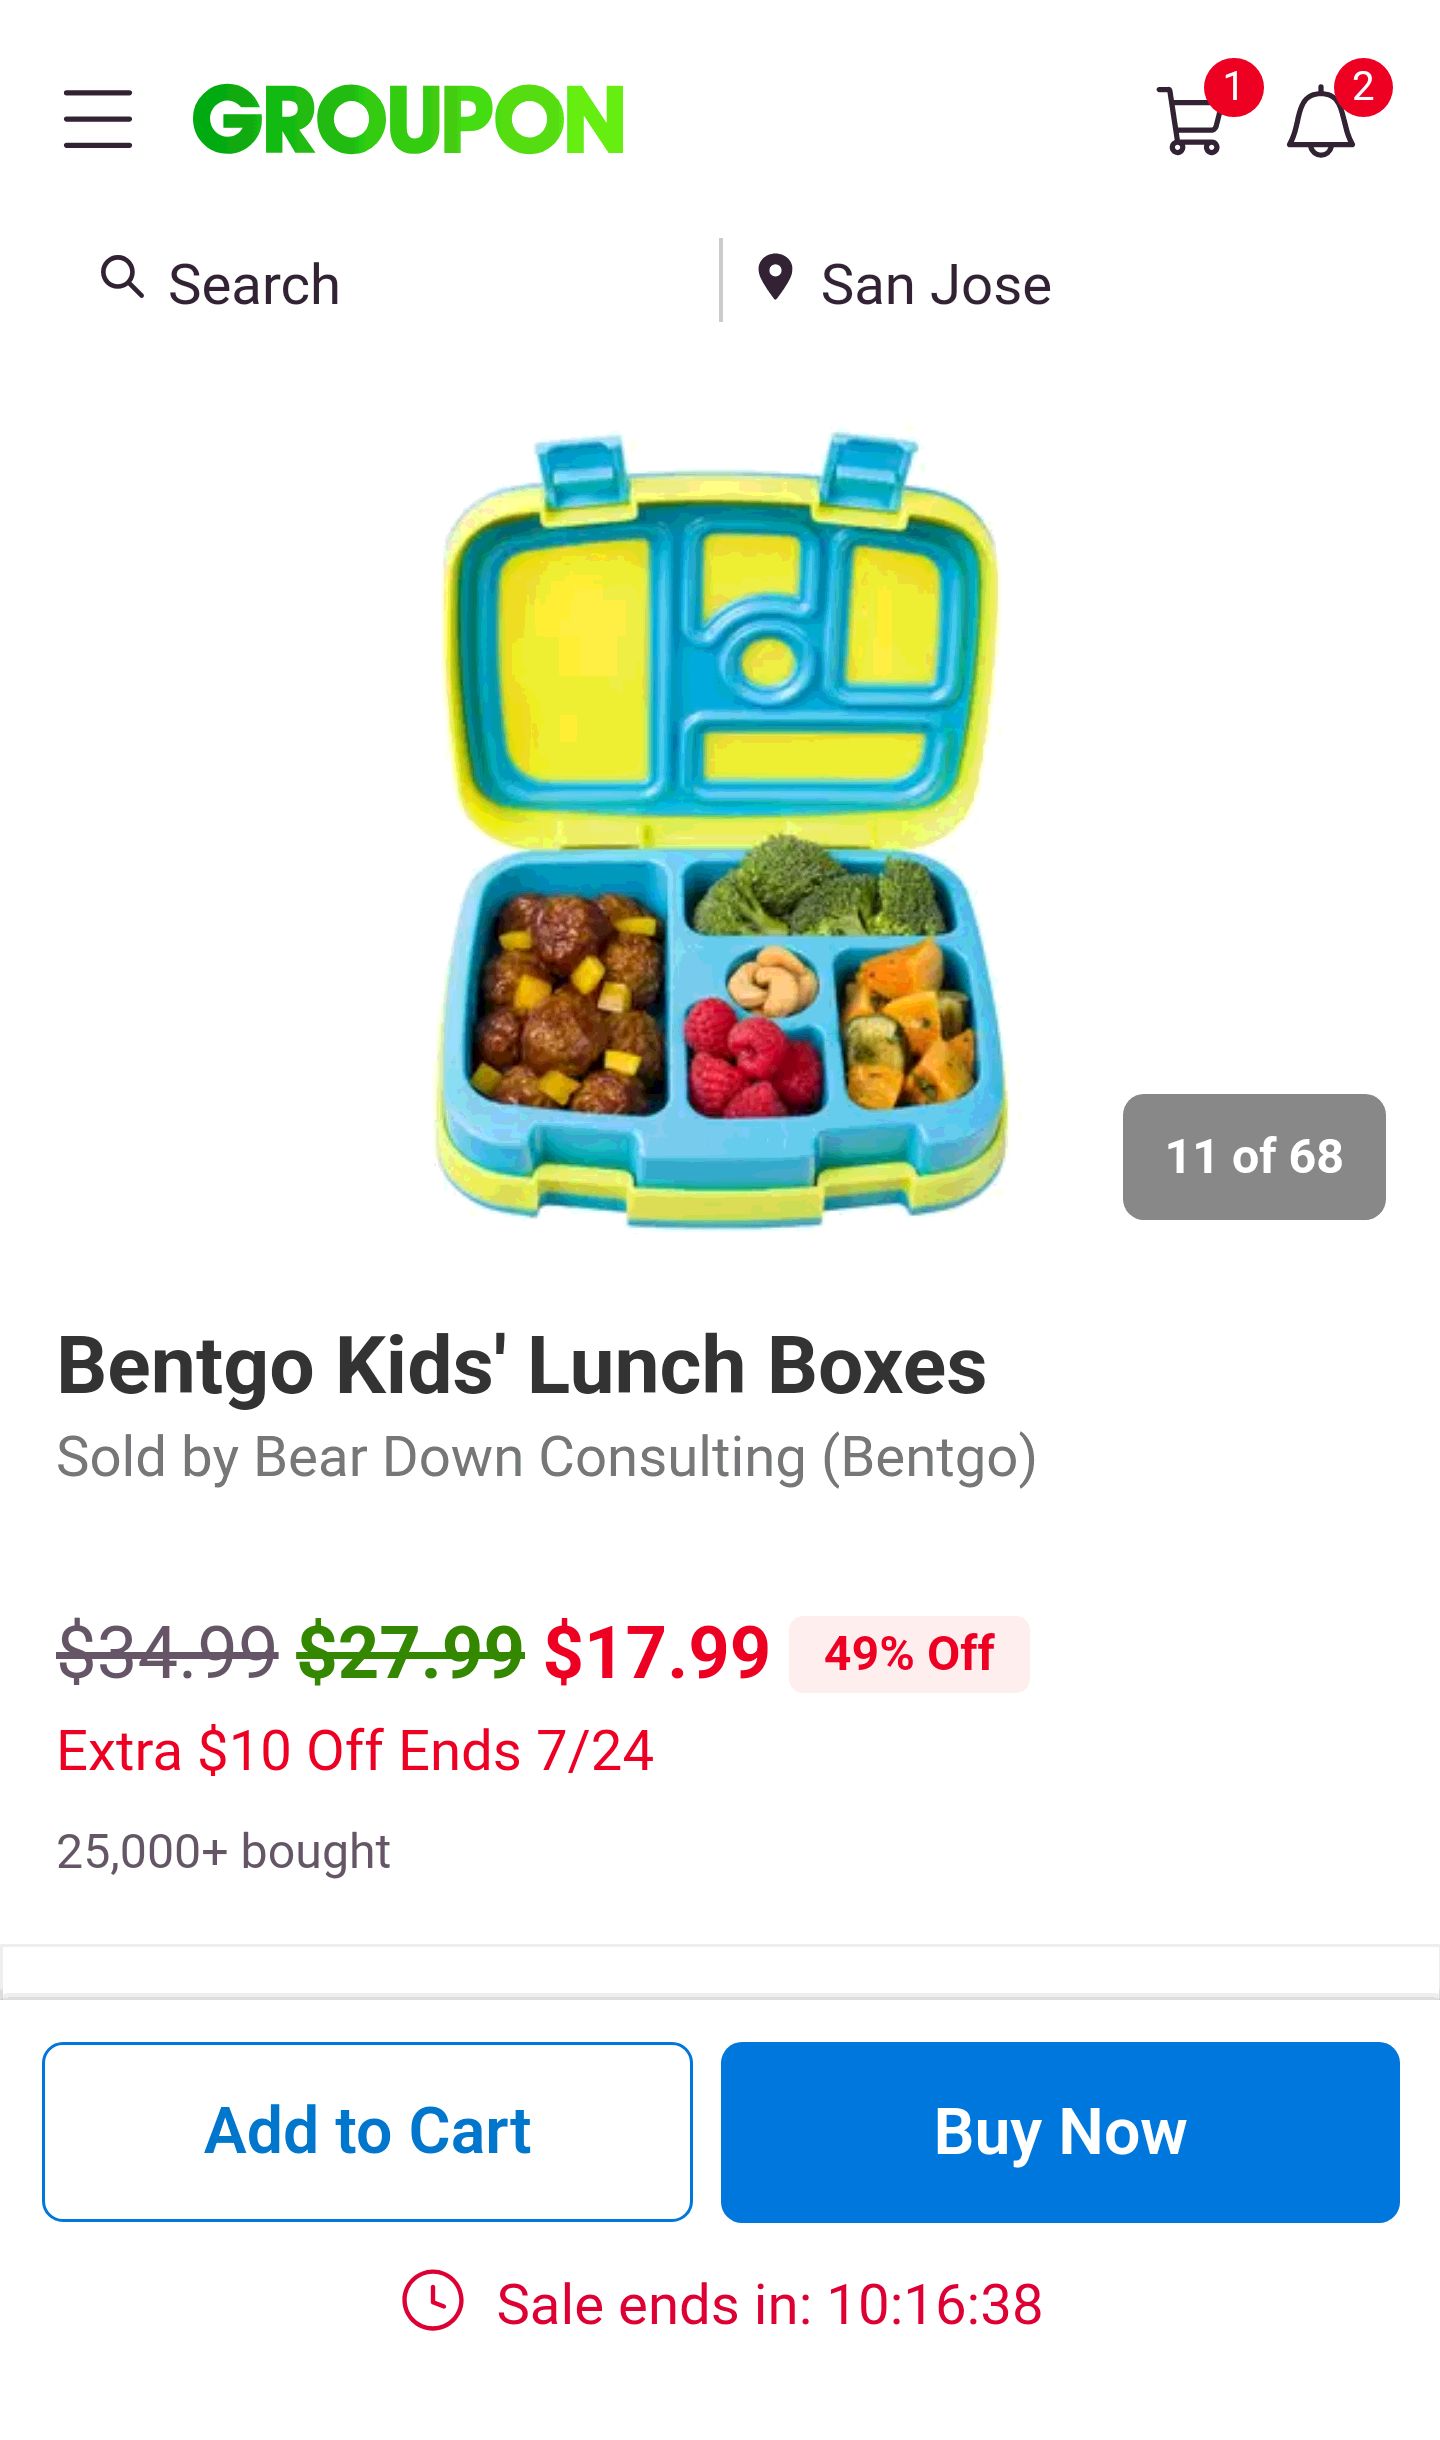 Up To 50% Off on Bentgo Kids' Lunch Boxes | Groupon Goods